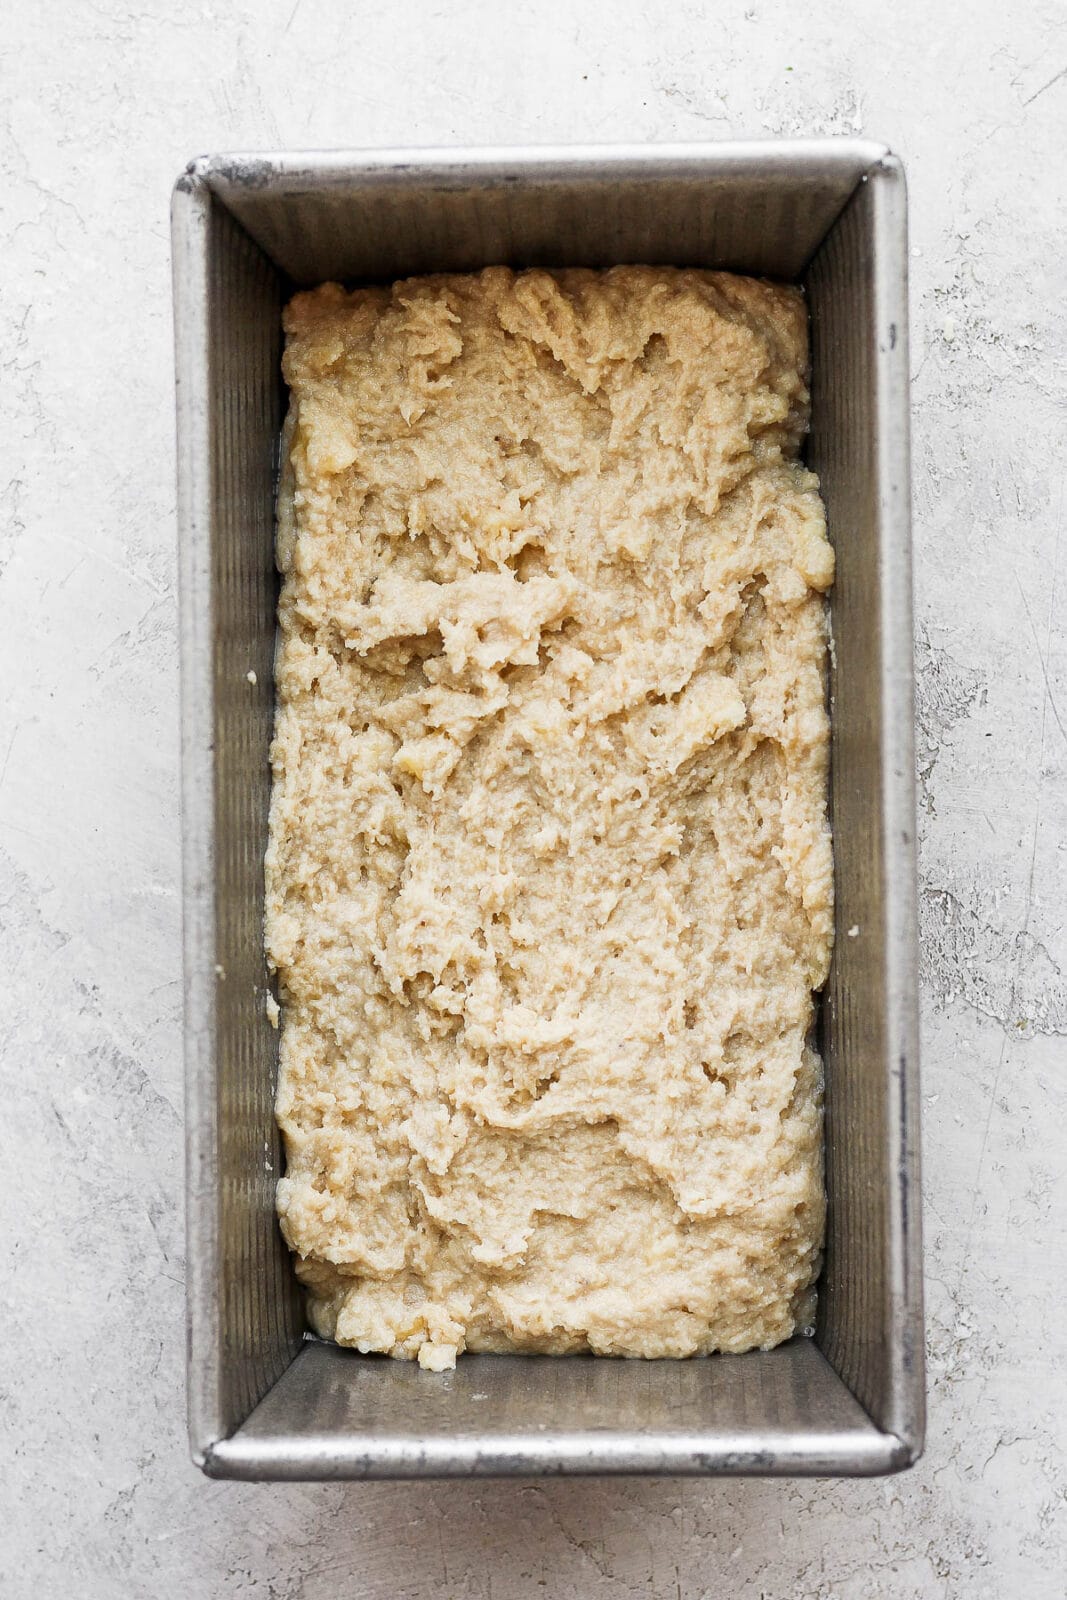 Paleo banana bread batter in a greased loaf pan.